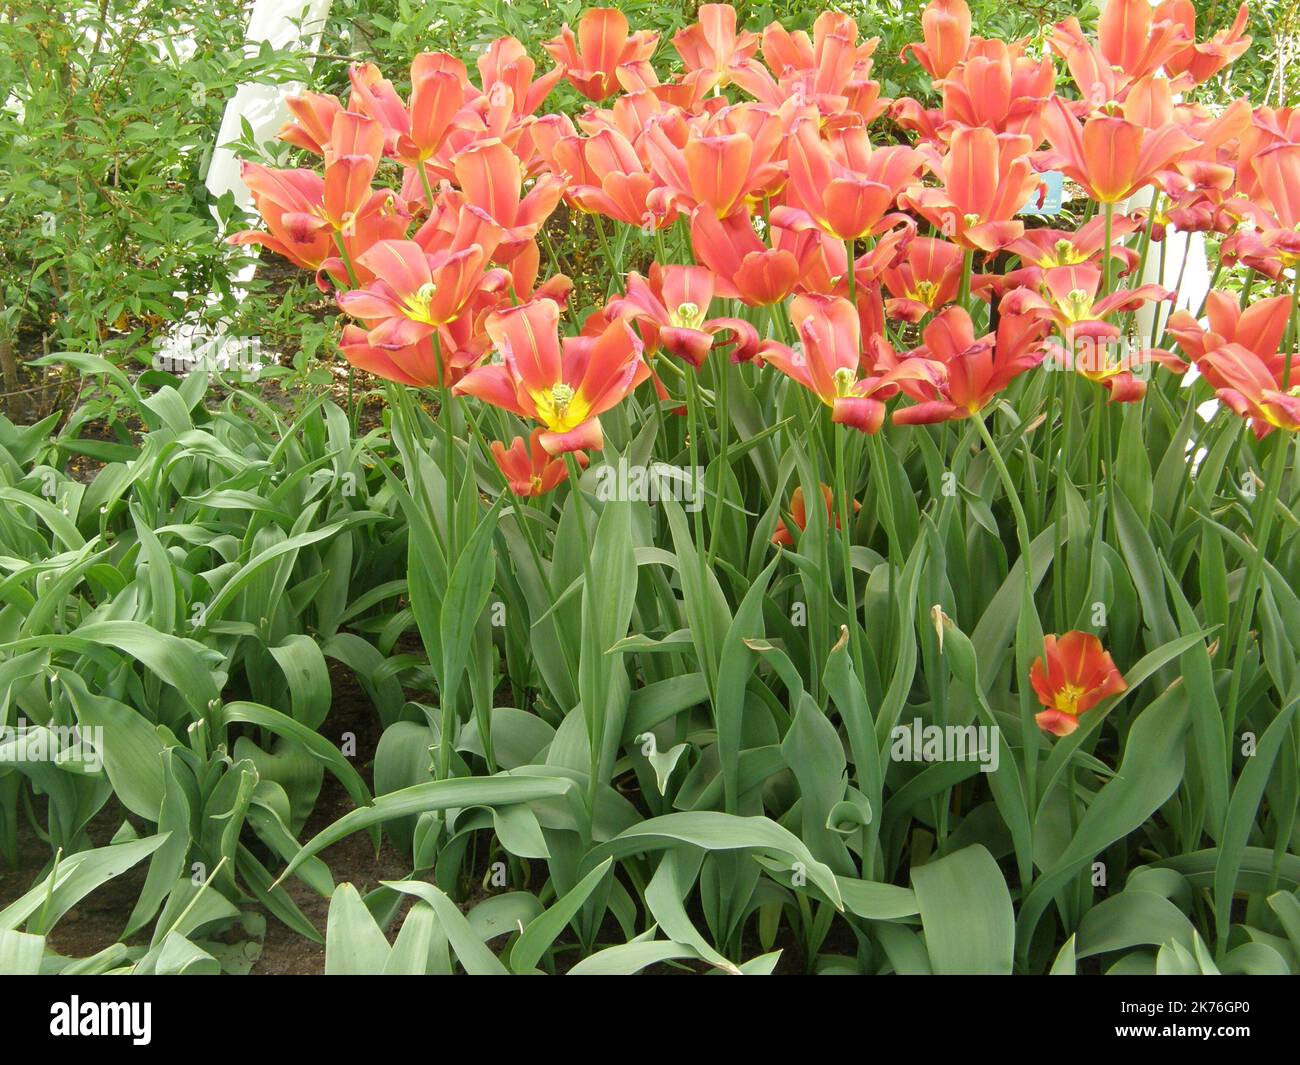 Red Single Late tulips (Tulipa) Sky High Scarlet bloom in a garden in April Stock Photo